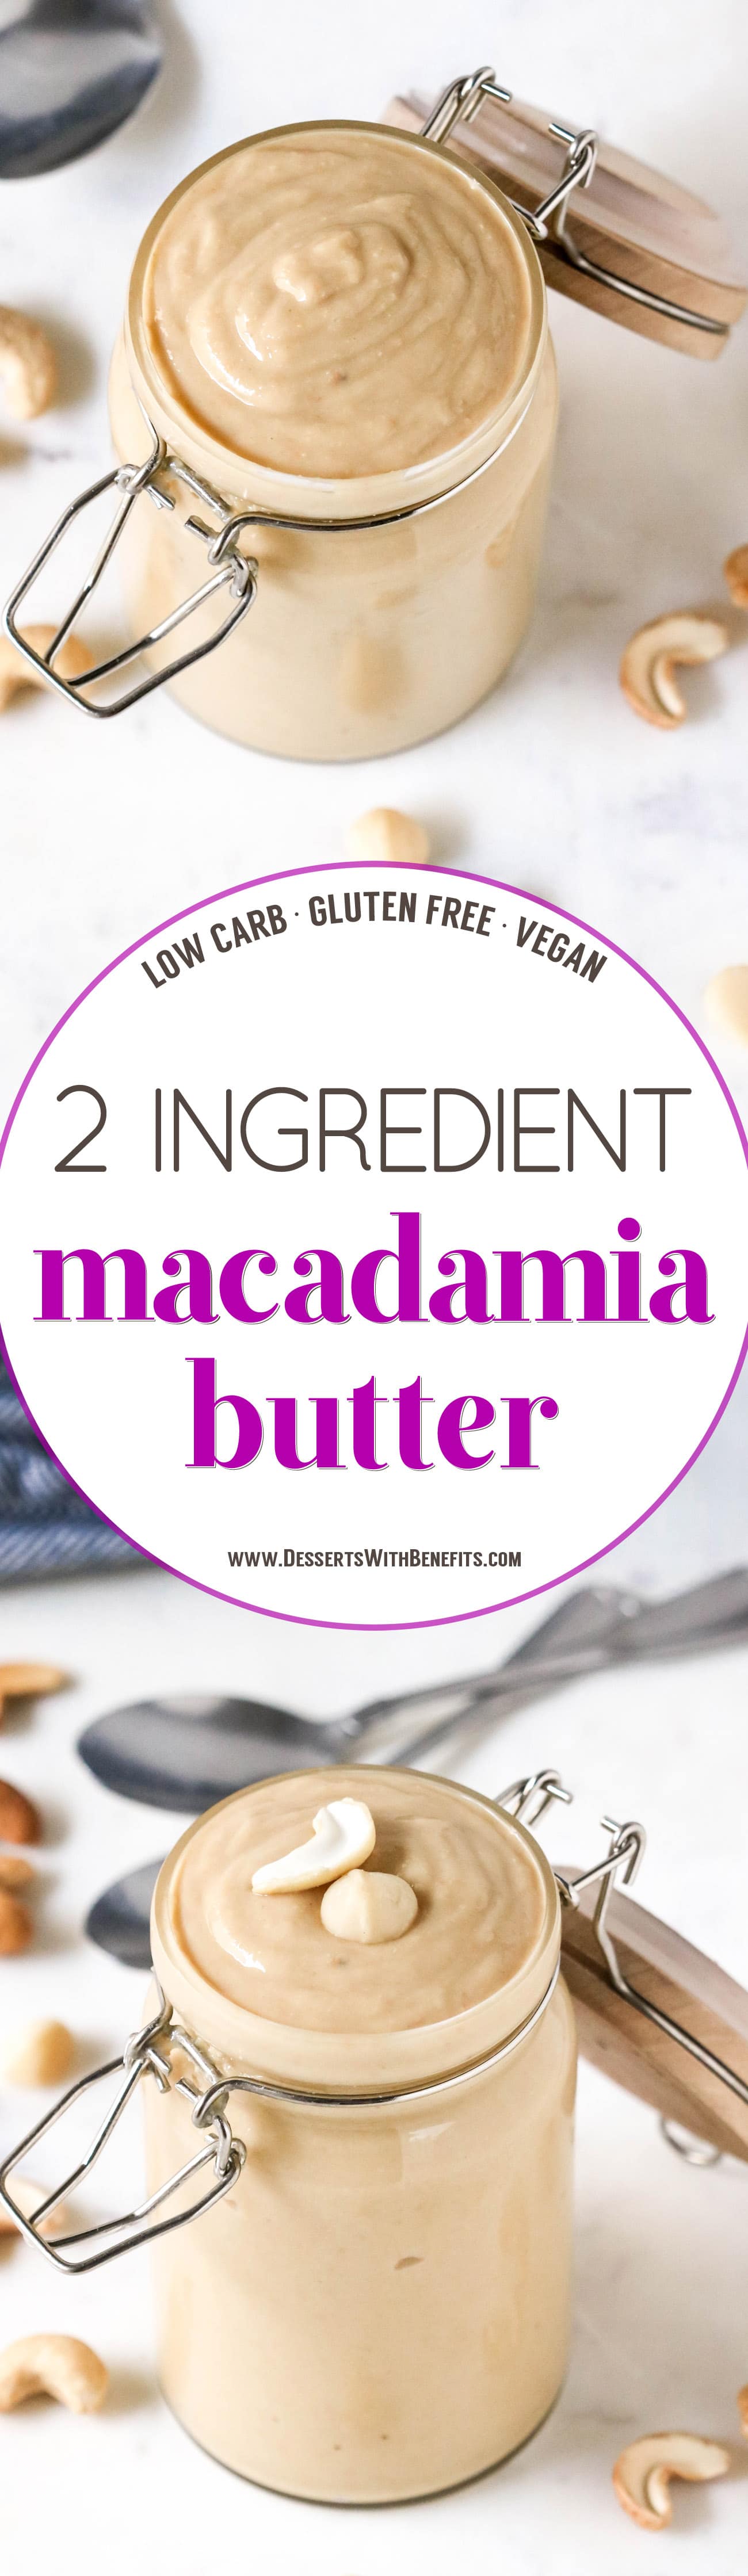 You can make Macadamia Butter AT HOME in as little as 3 minutes! It's so rich, buttery, smooth, and creamy, you'll wonder why it's not as popular as peanut butter and almond butter. You're 3 minutes away from the silkiest, drippiest, most flavorful Homemade Macadamia Butter in all the land (all natural, sugar free, low carb, gluten free, vegan)